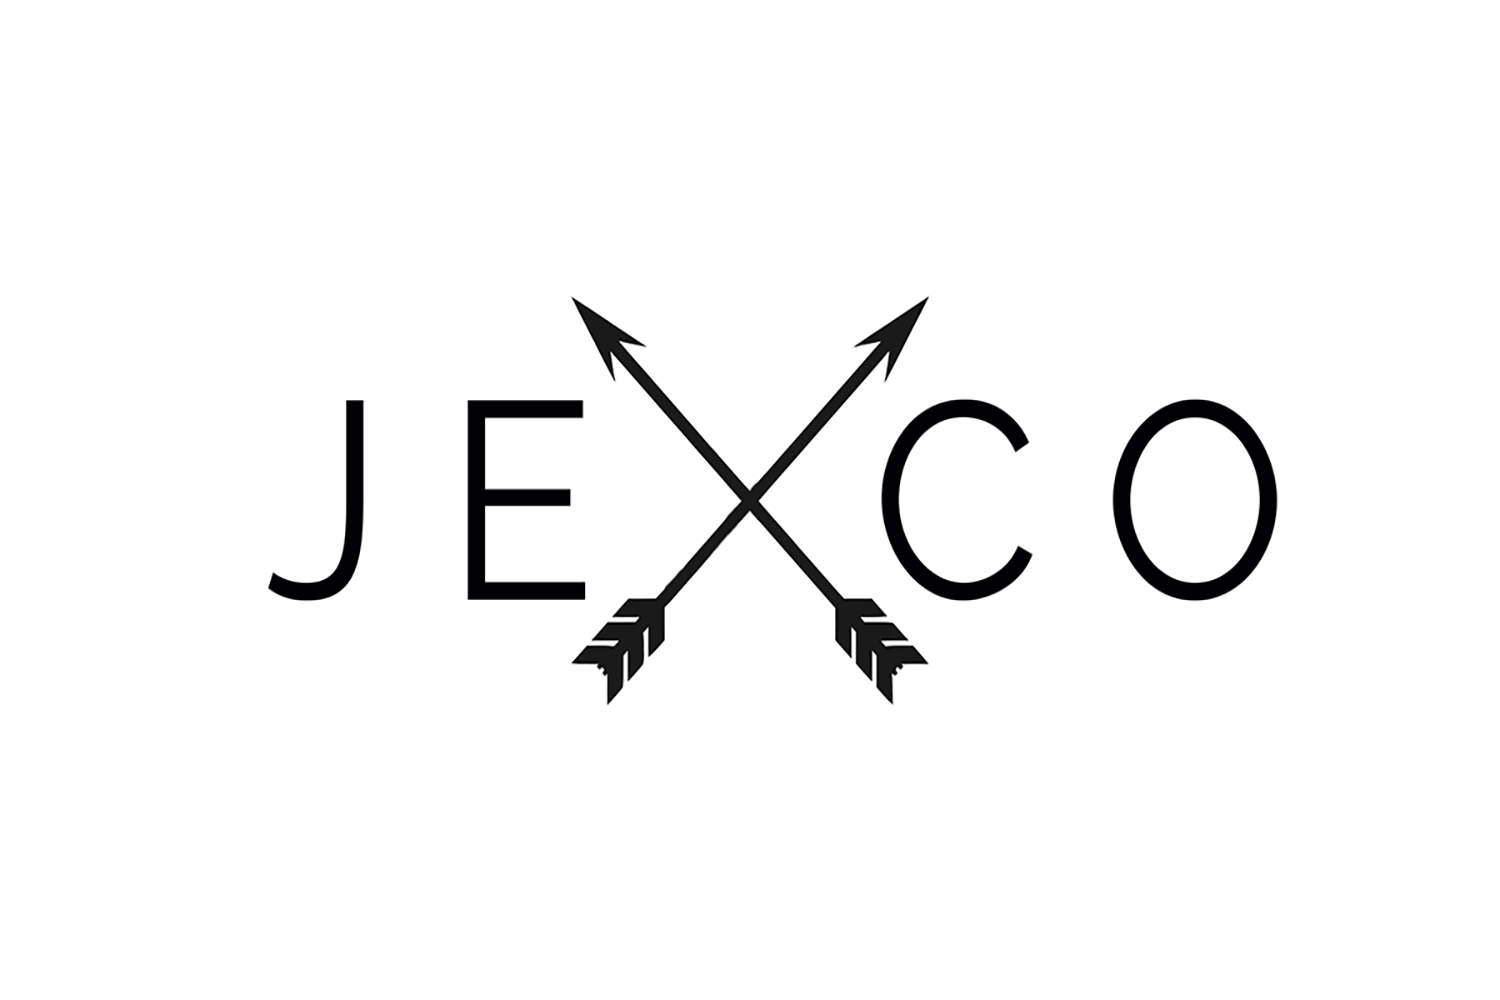 The official logo of JeXco Clothing, in East Liverpool Ohio.